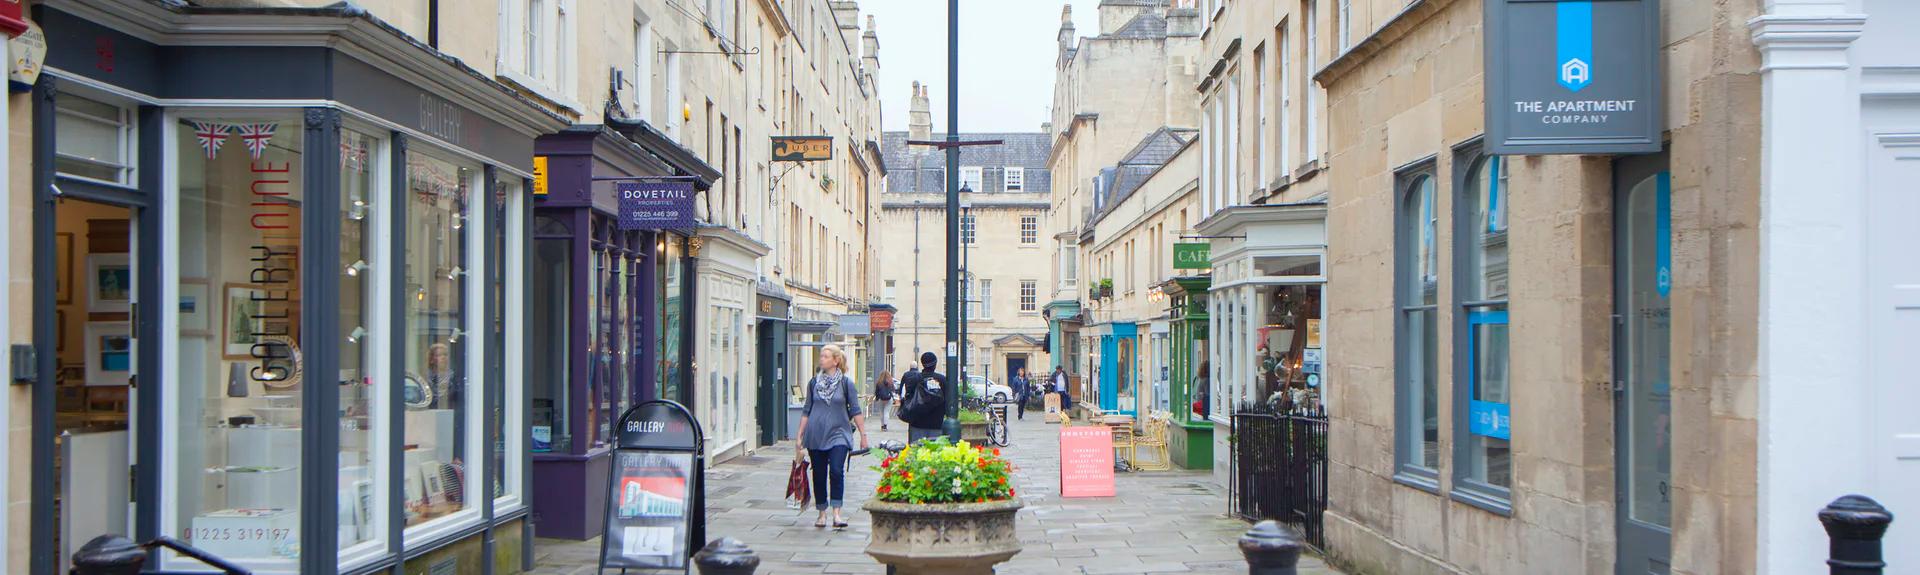 A pedestrian street in Bath showing Georgian buildings and shop frontss